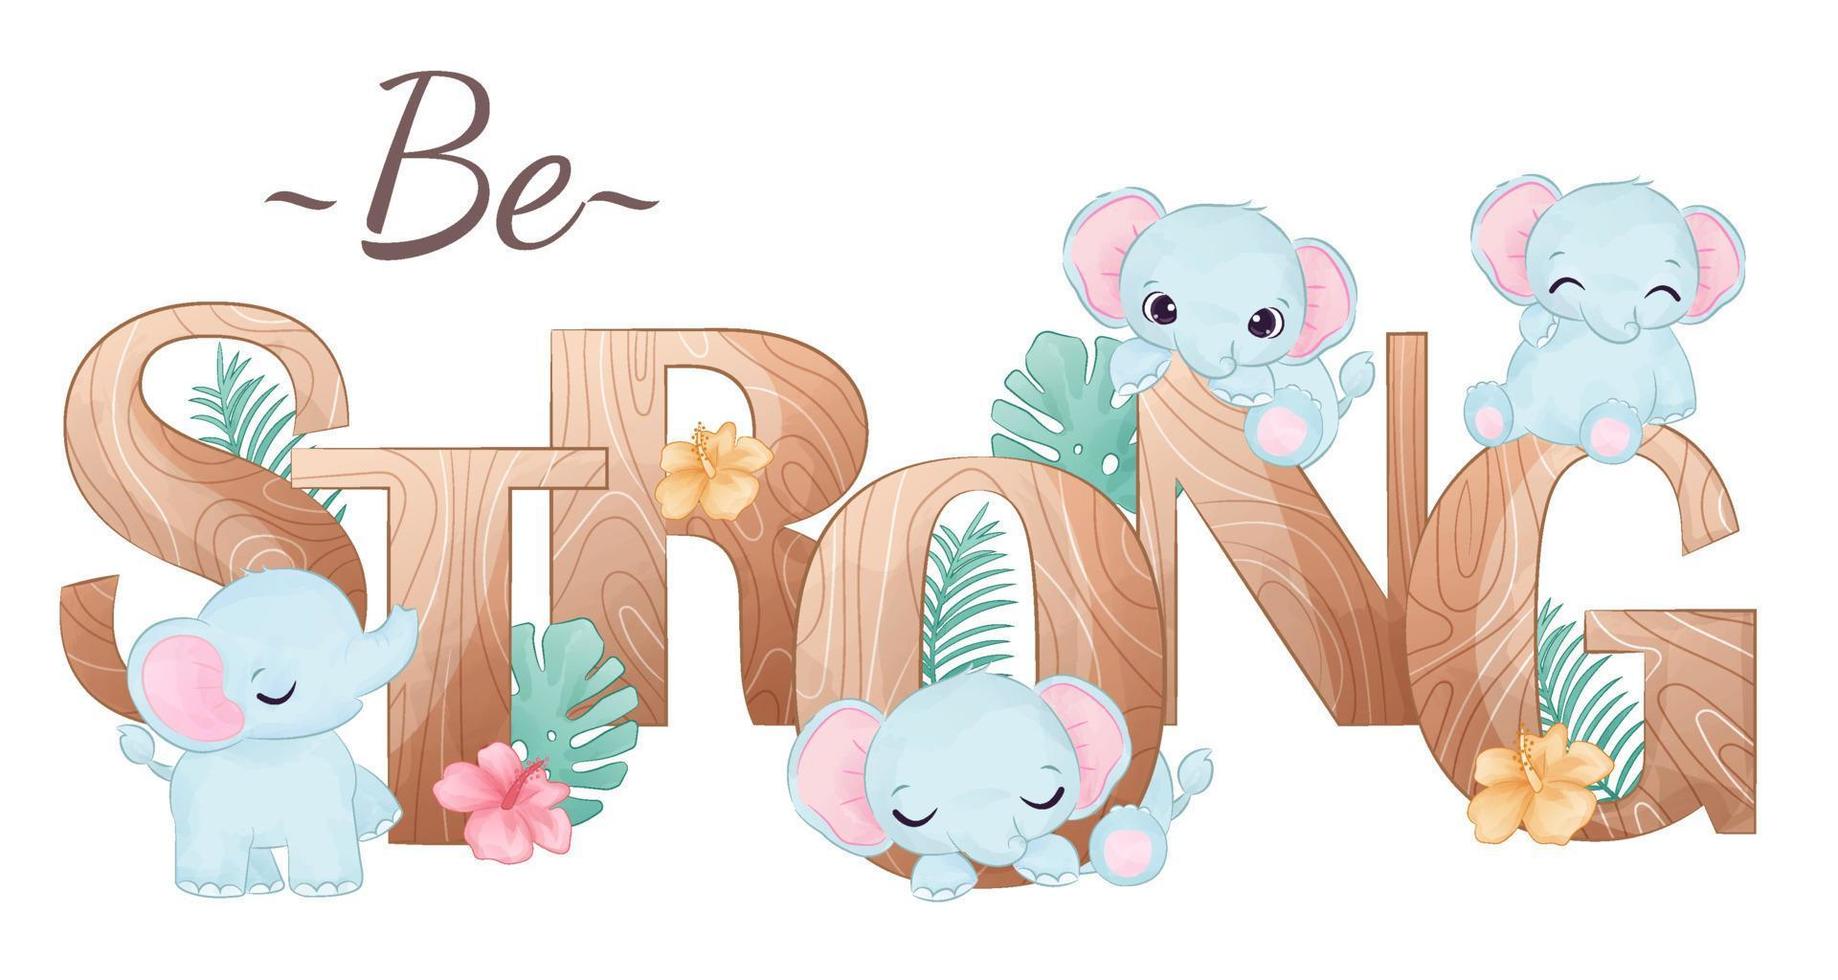 Cute wild animals illustration with alphabets vector